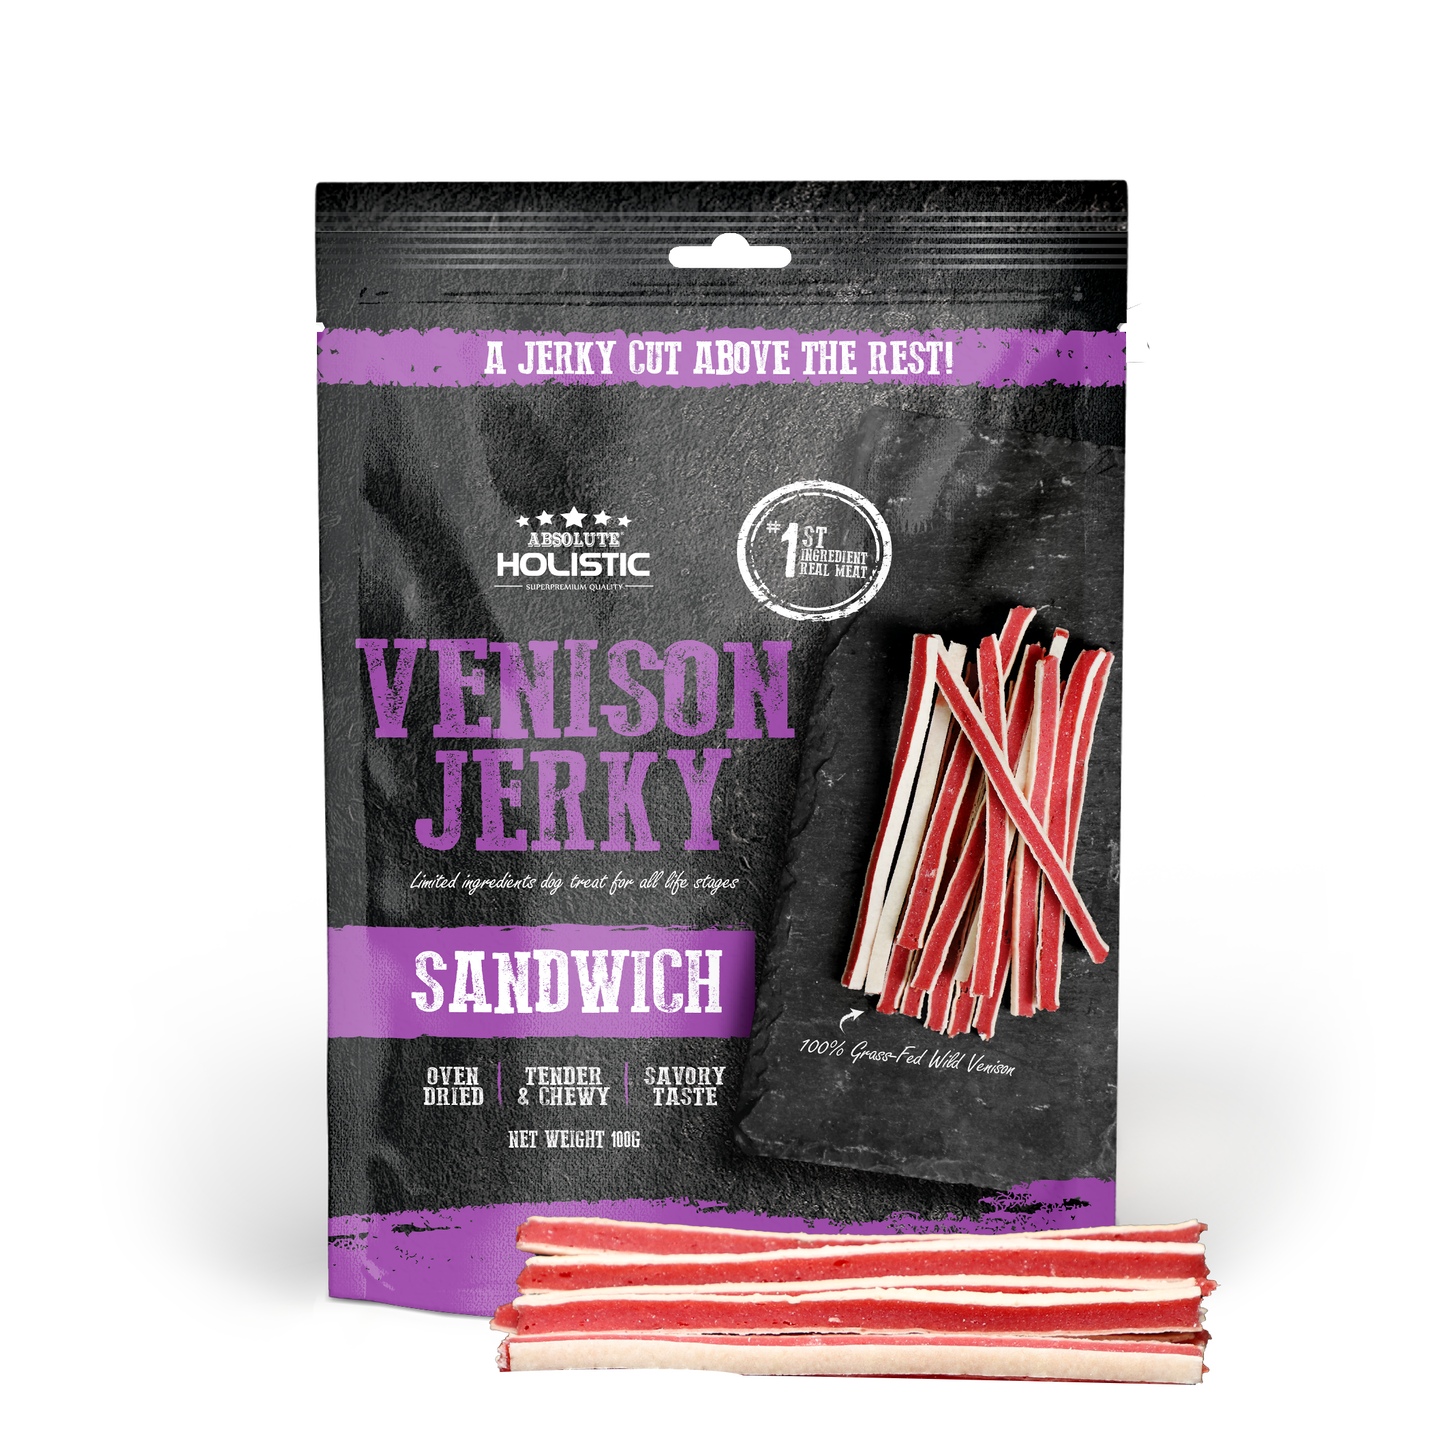 [Up to EXTRA 10% OFF] Absolute Holistic Grain-Free Venison & Whitefish Sandwich Jerky Treat for Dogs 100g